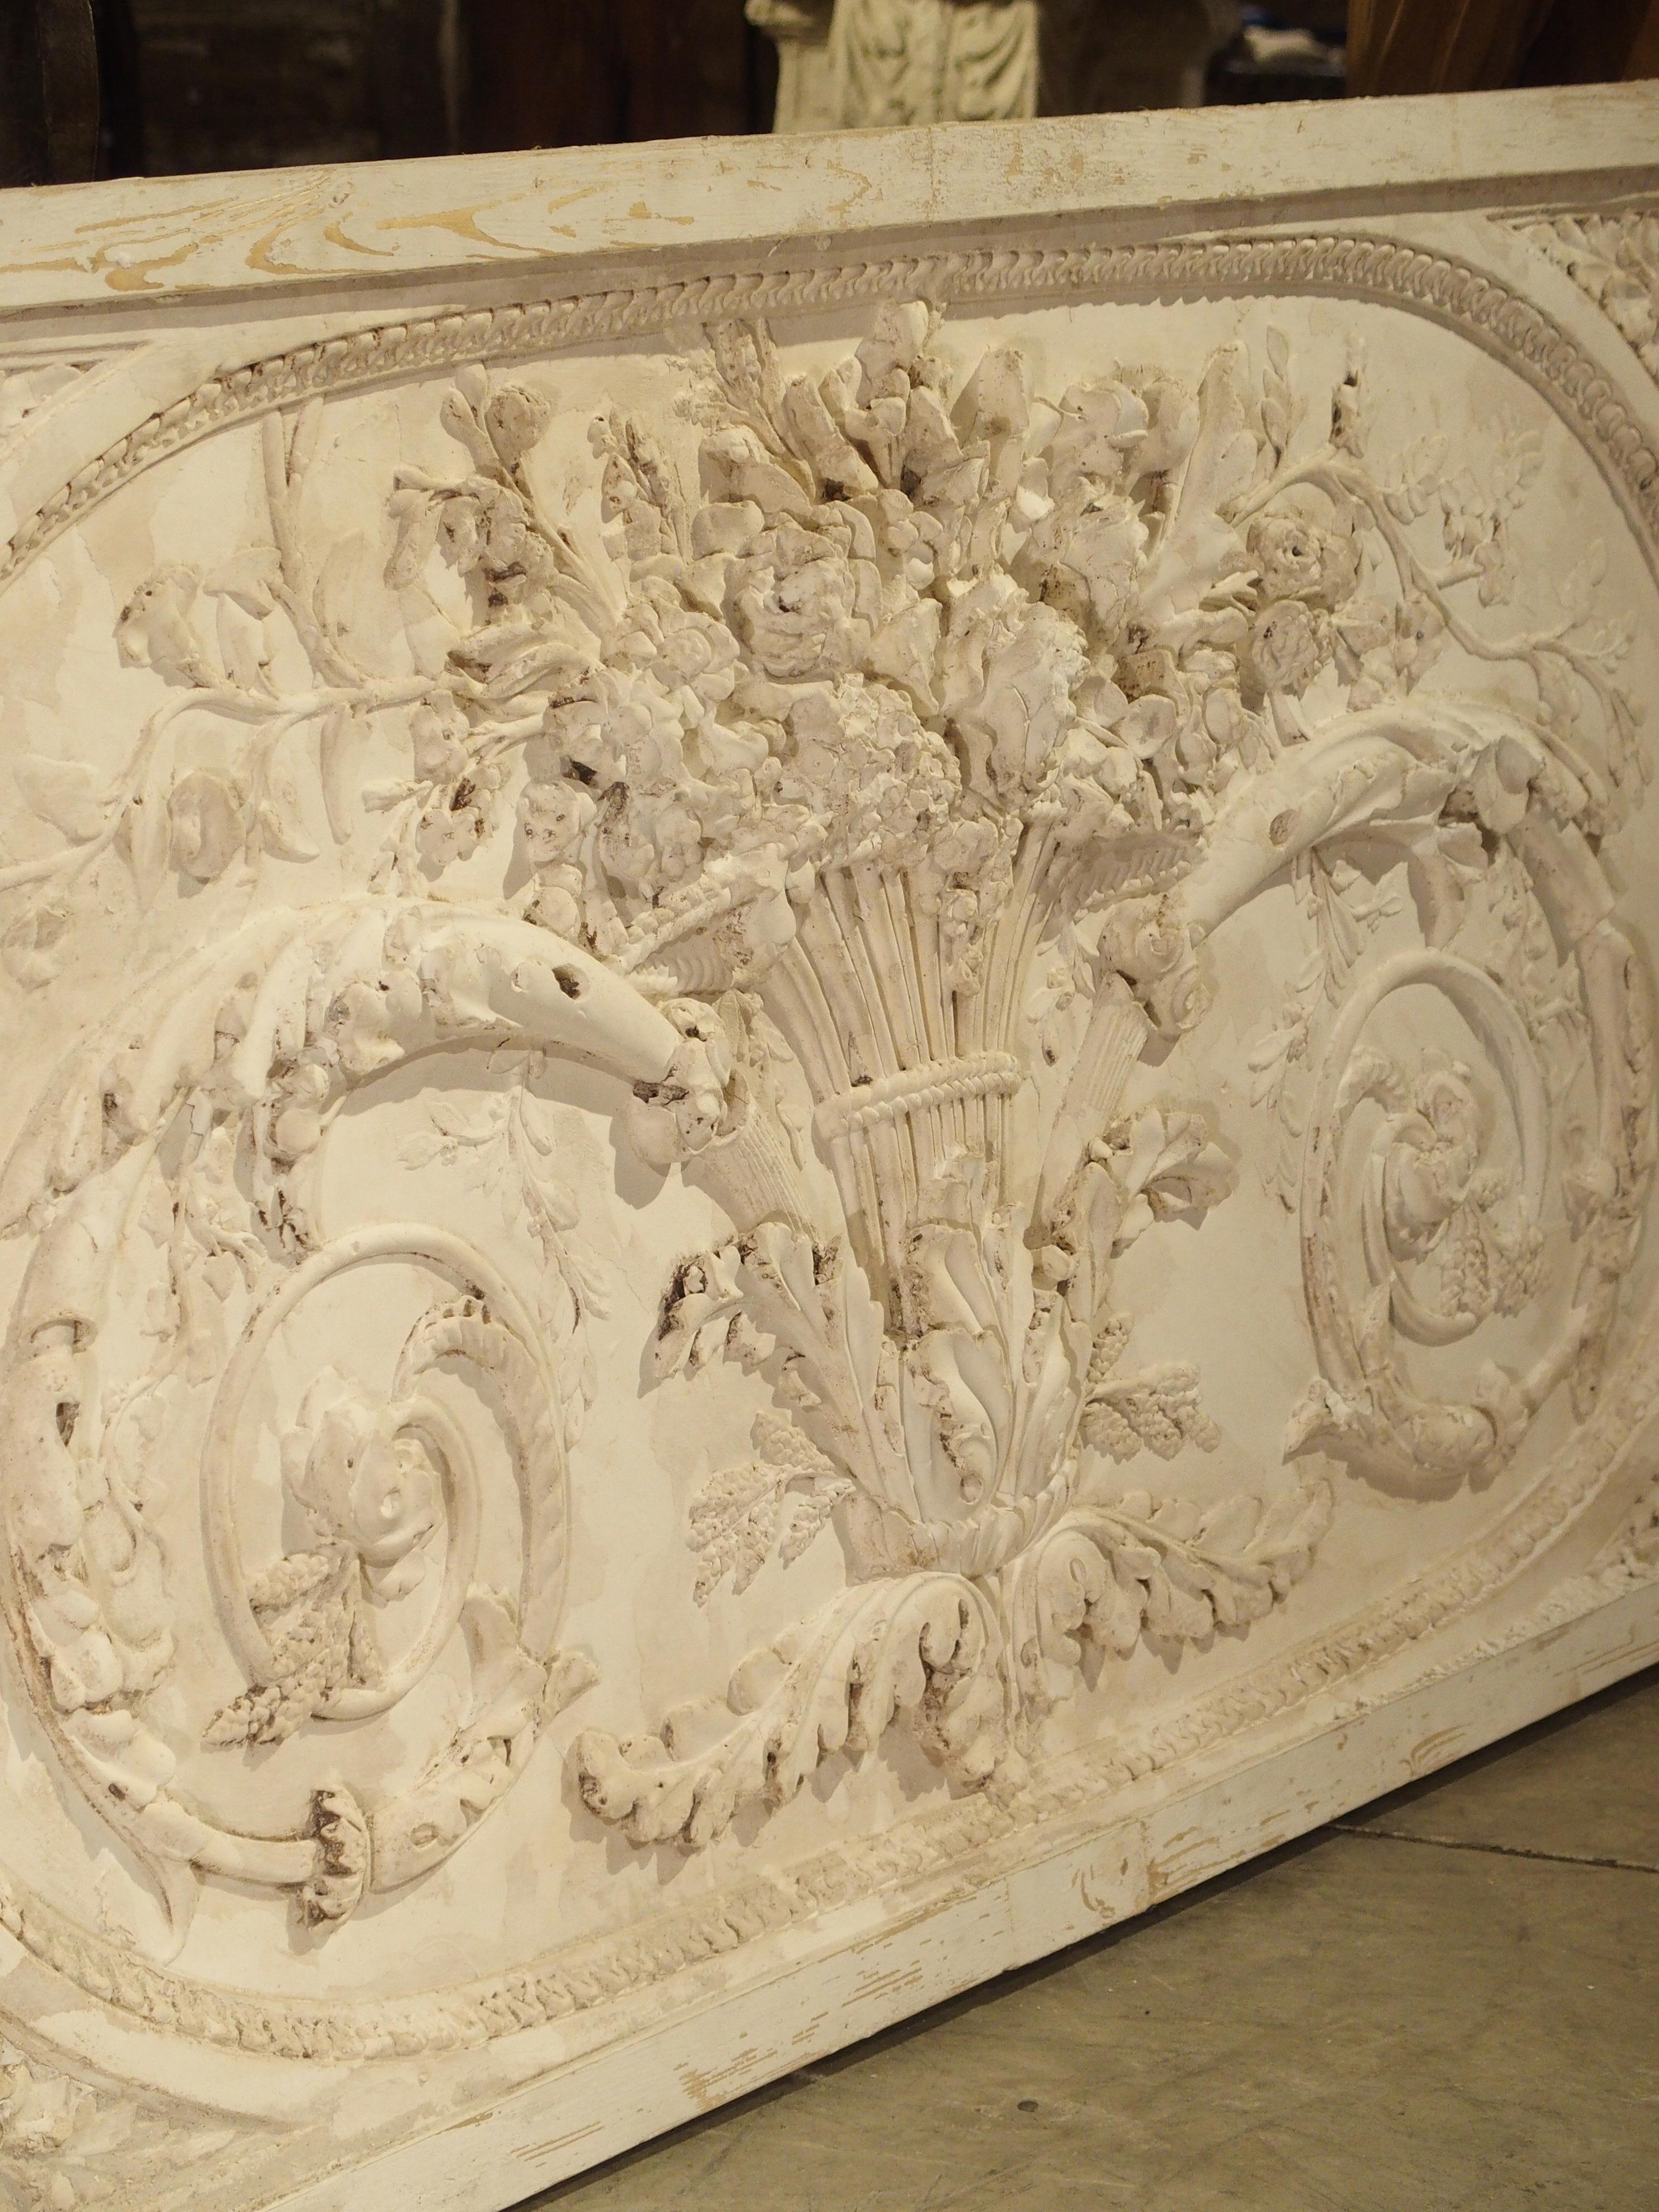 This beautiful panel is a parcel paint plaster bas relief from France. The framed plaster overdoor depicts Classic scrolling rinceau growing from a central vase. Originally, these were placed over doors in French paneled rooms. Today, they can still